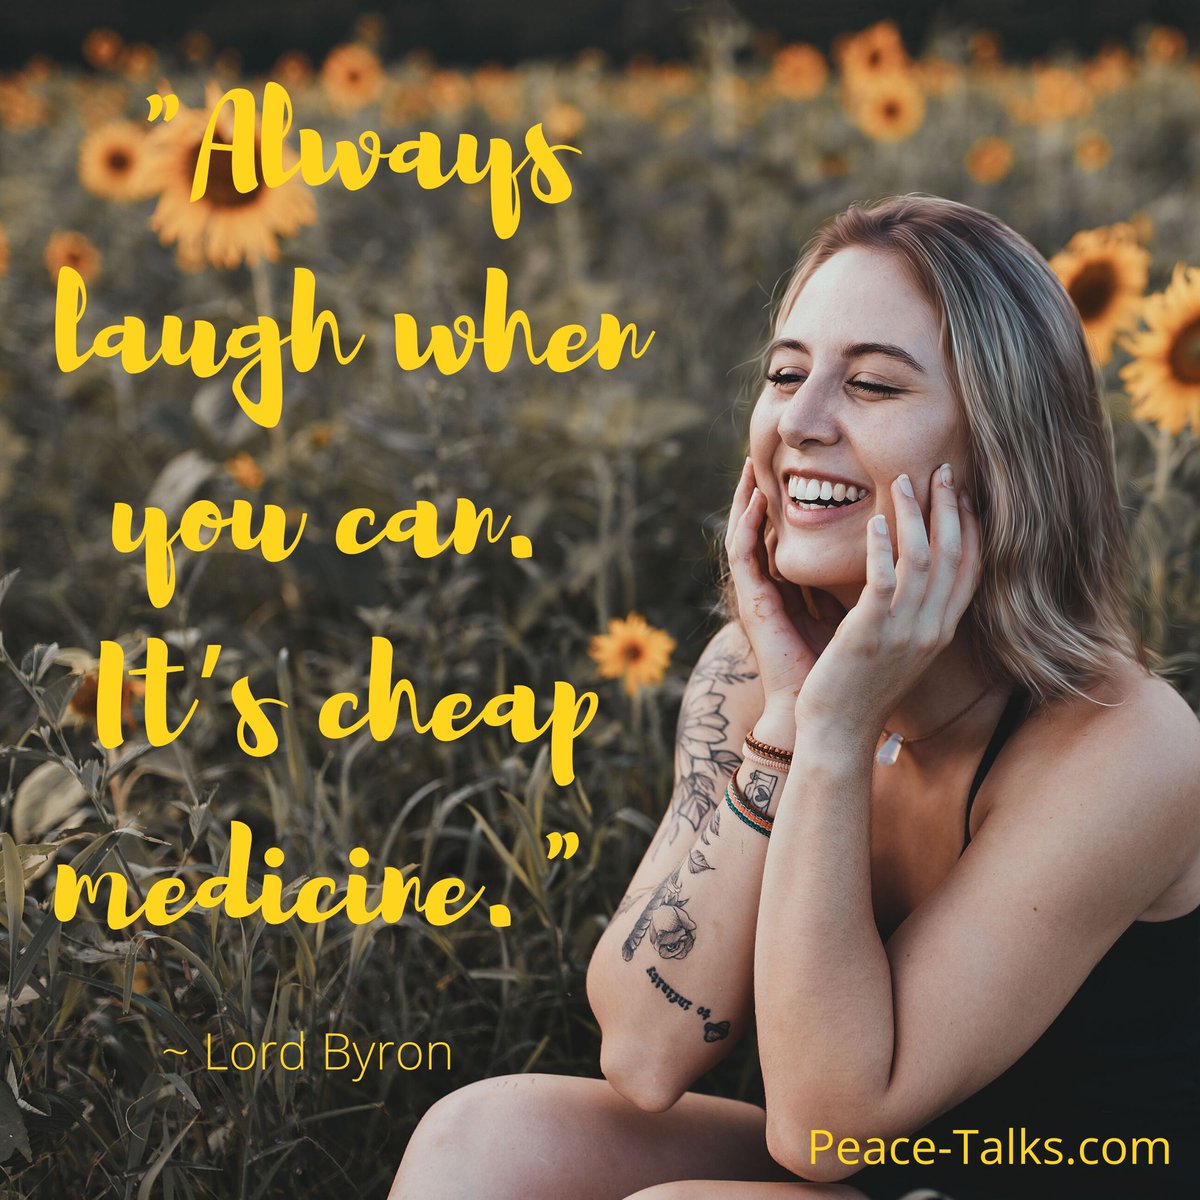 'Always laugh when you can. It’s cheap medicine.' ~ Lord Byron #divorce #divorcemediation #inspiration